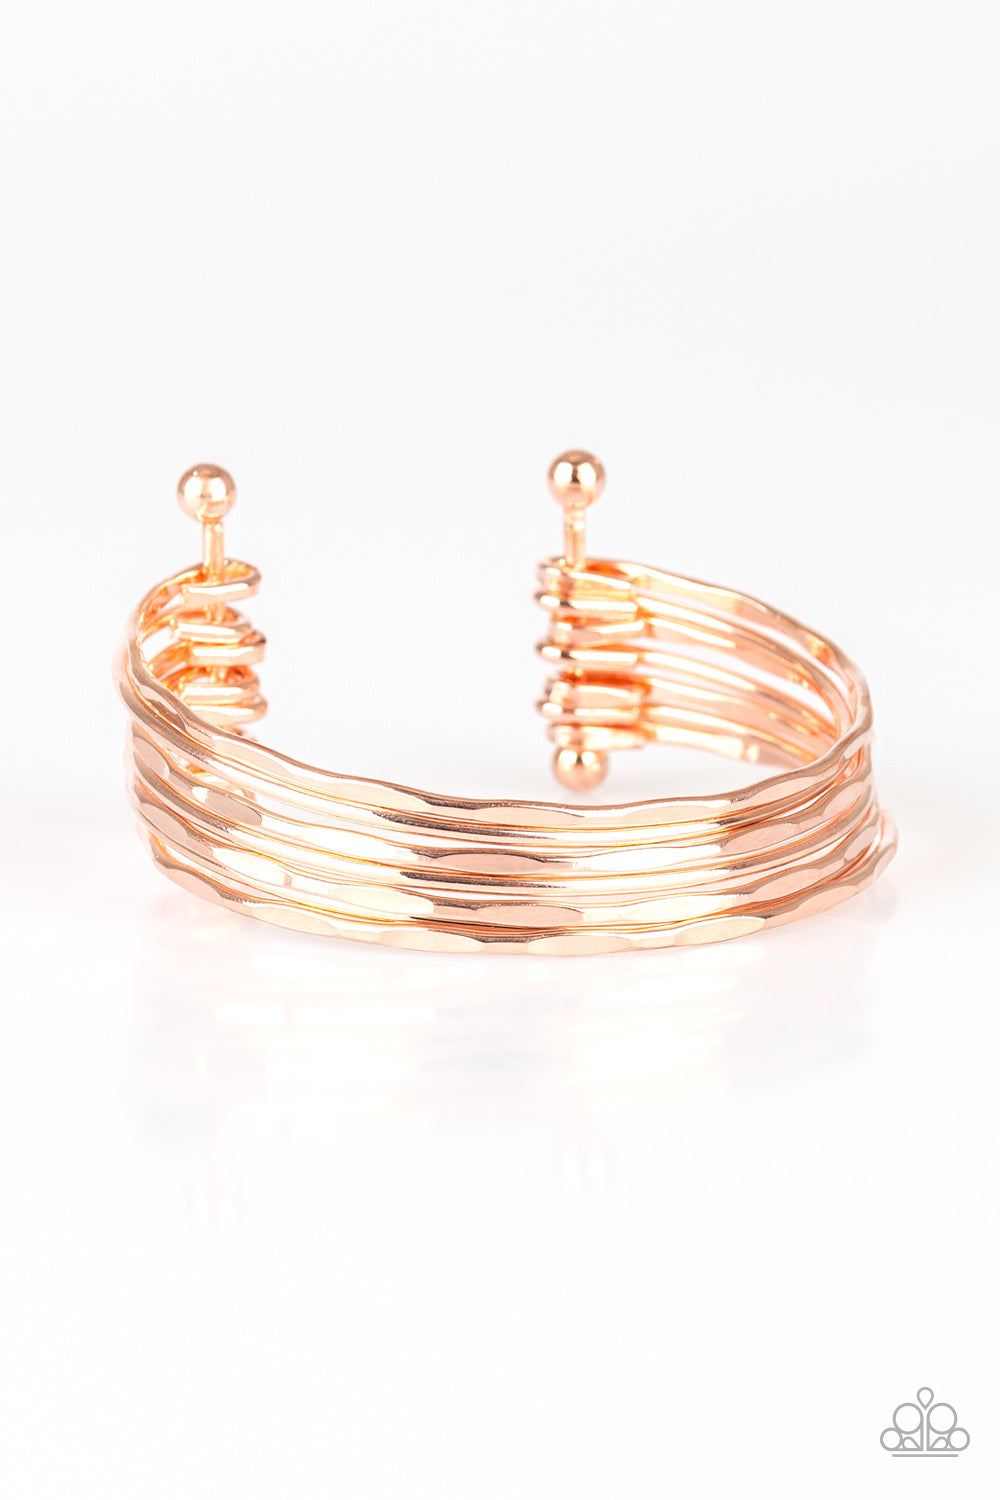 Timelessly Textured - Rose Gold Bracelet - TheMasterCollection